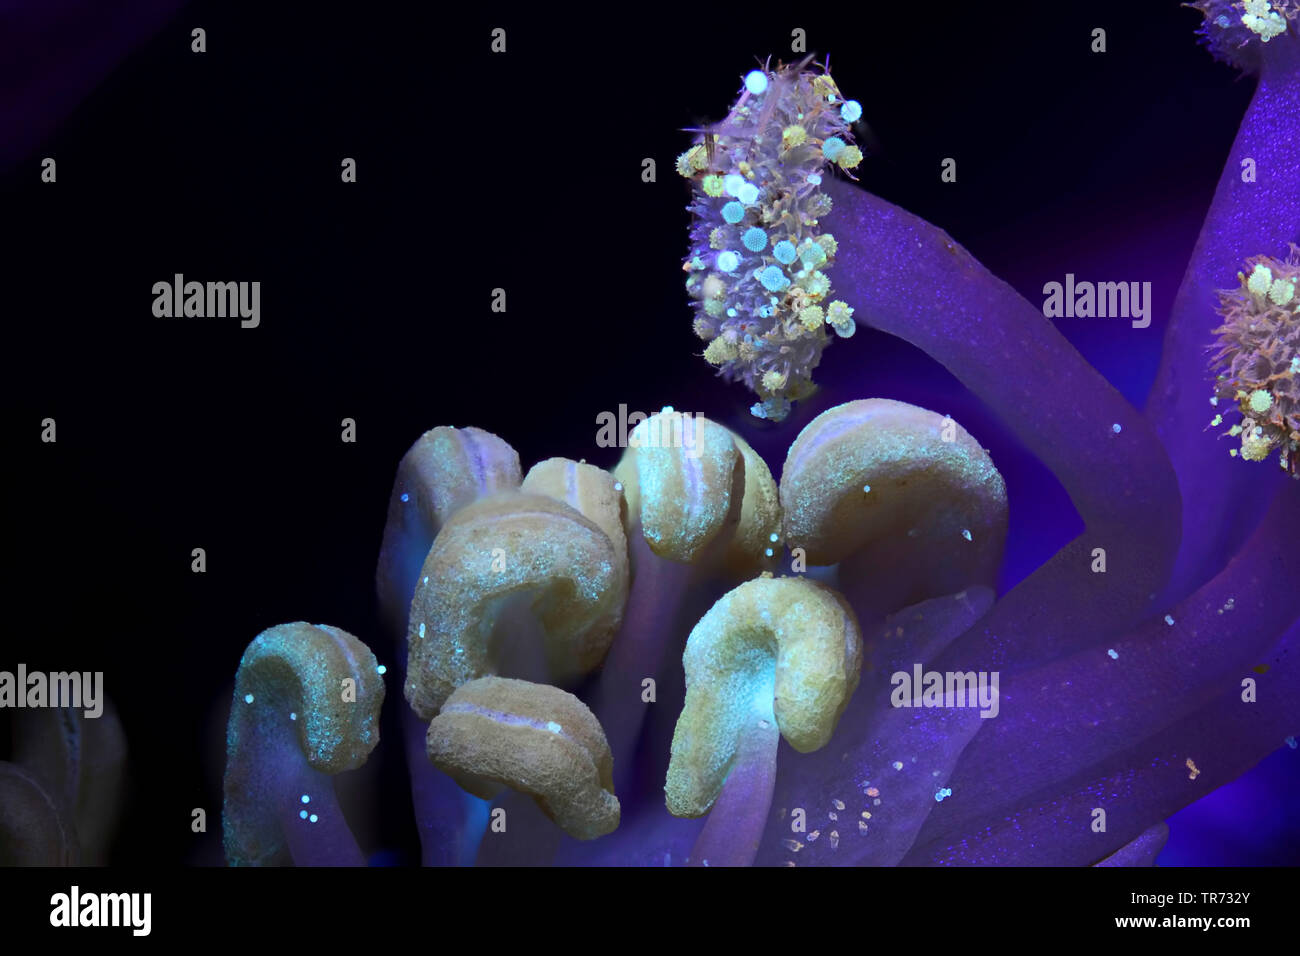 shrubby althaea, rose-of-Sharon (Hibiscus syriacus), stigma and stamens in UV light, Germany Stock Photo